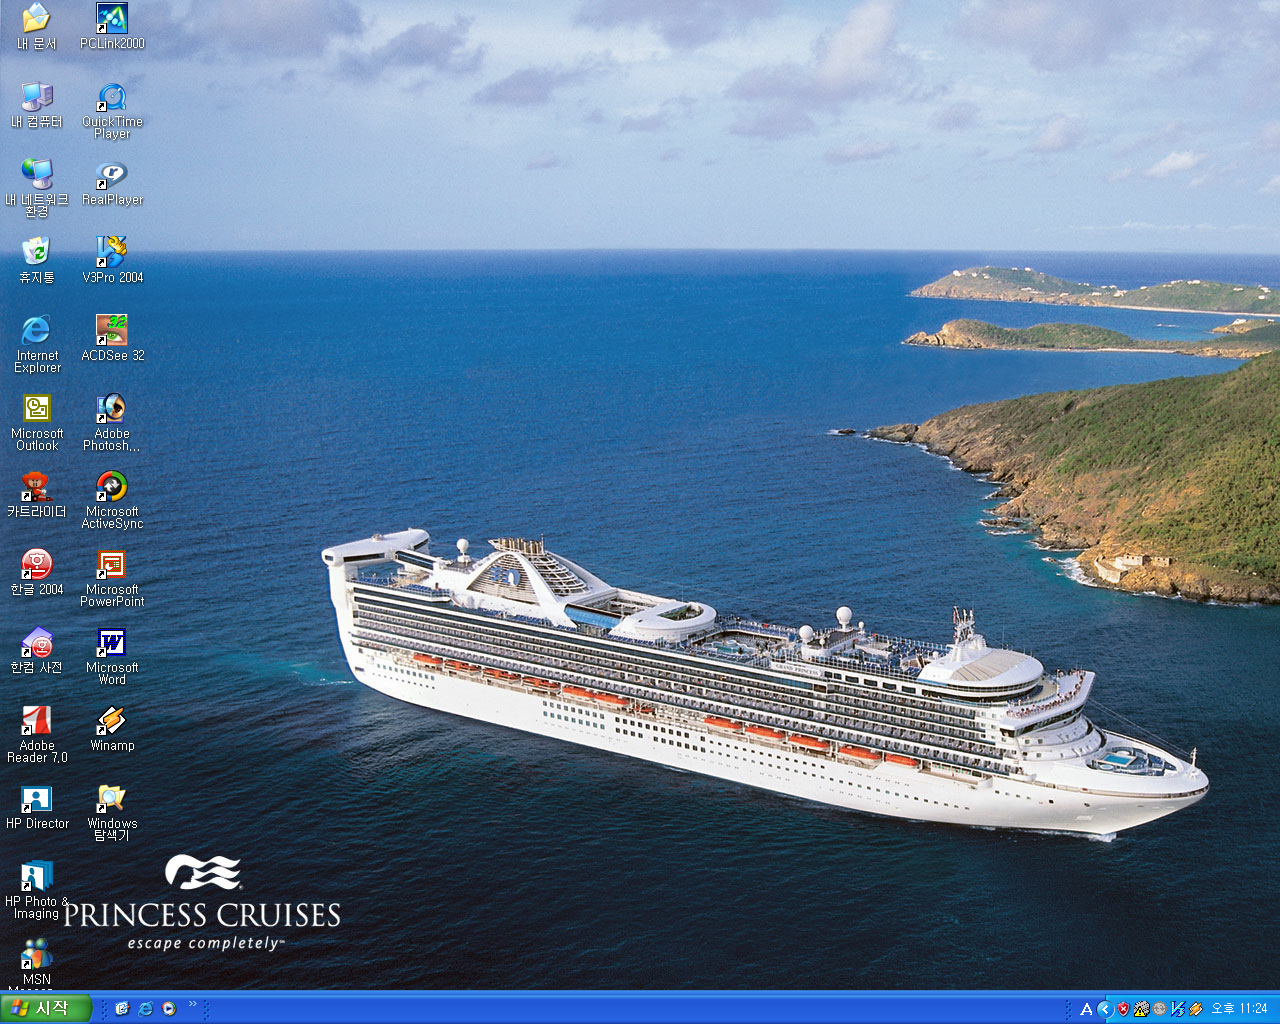 Free download Cruise Ship Wallpaper by sojh85 on [1280x1024] for your